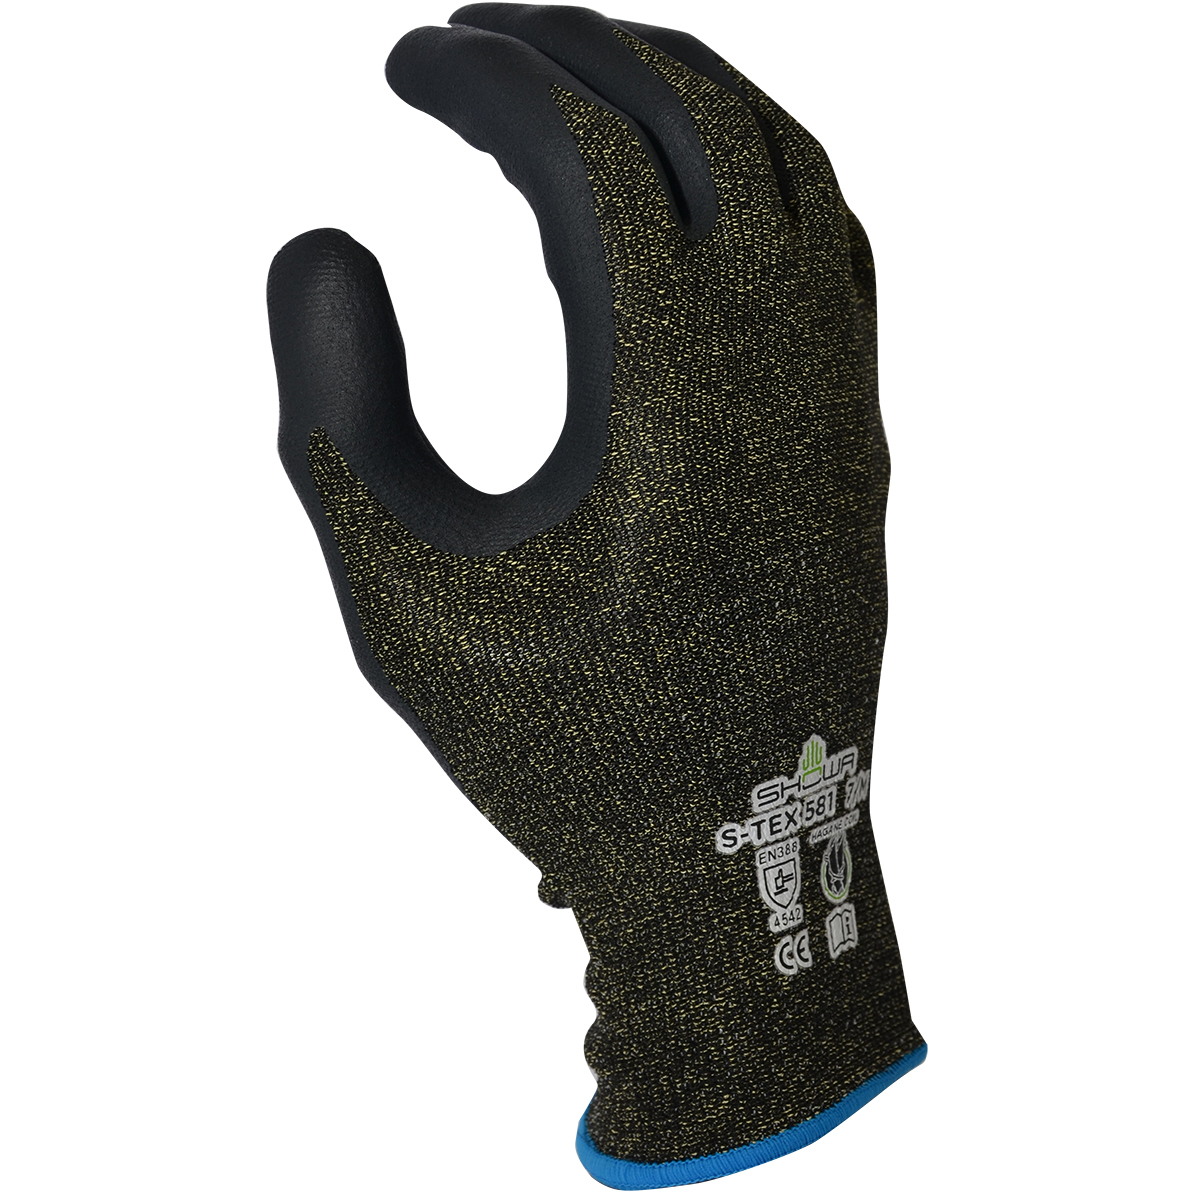 SHOWA® S-TEX® 581 13 Gauge DuPont™ Kevlar® And Hagane Coil® Cut Resistant Gloves With Microporous Nitrile Coated Palm